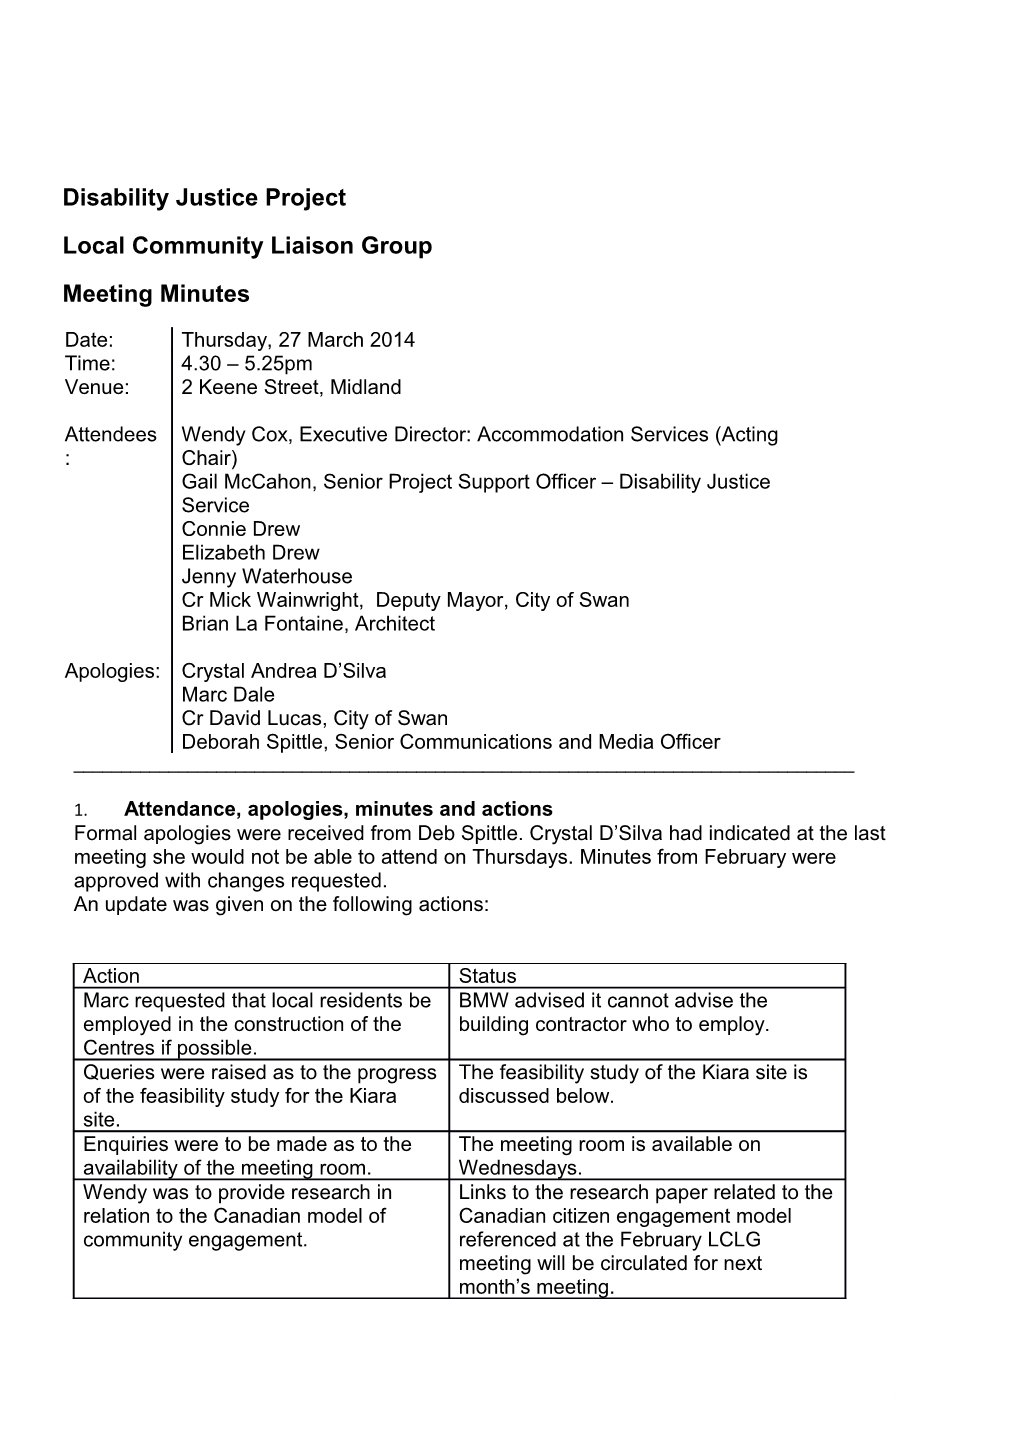 Disability Justice Centres Local Community Liaison Group Meeting Minutes 27 March 2014